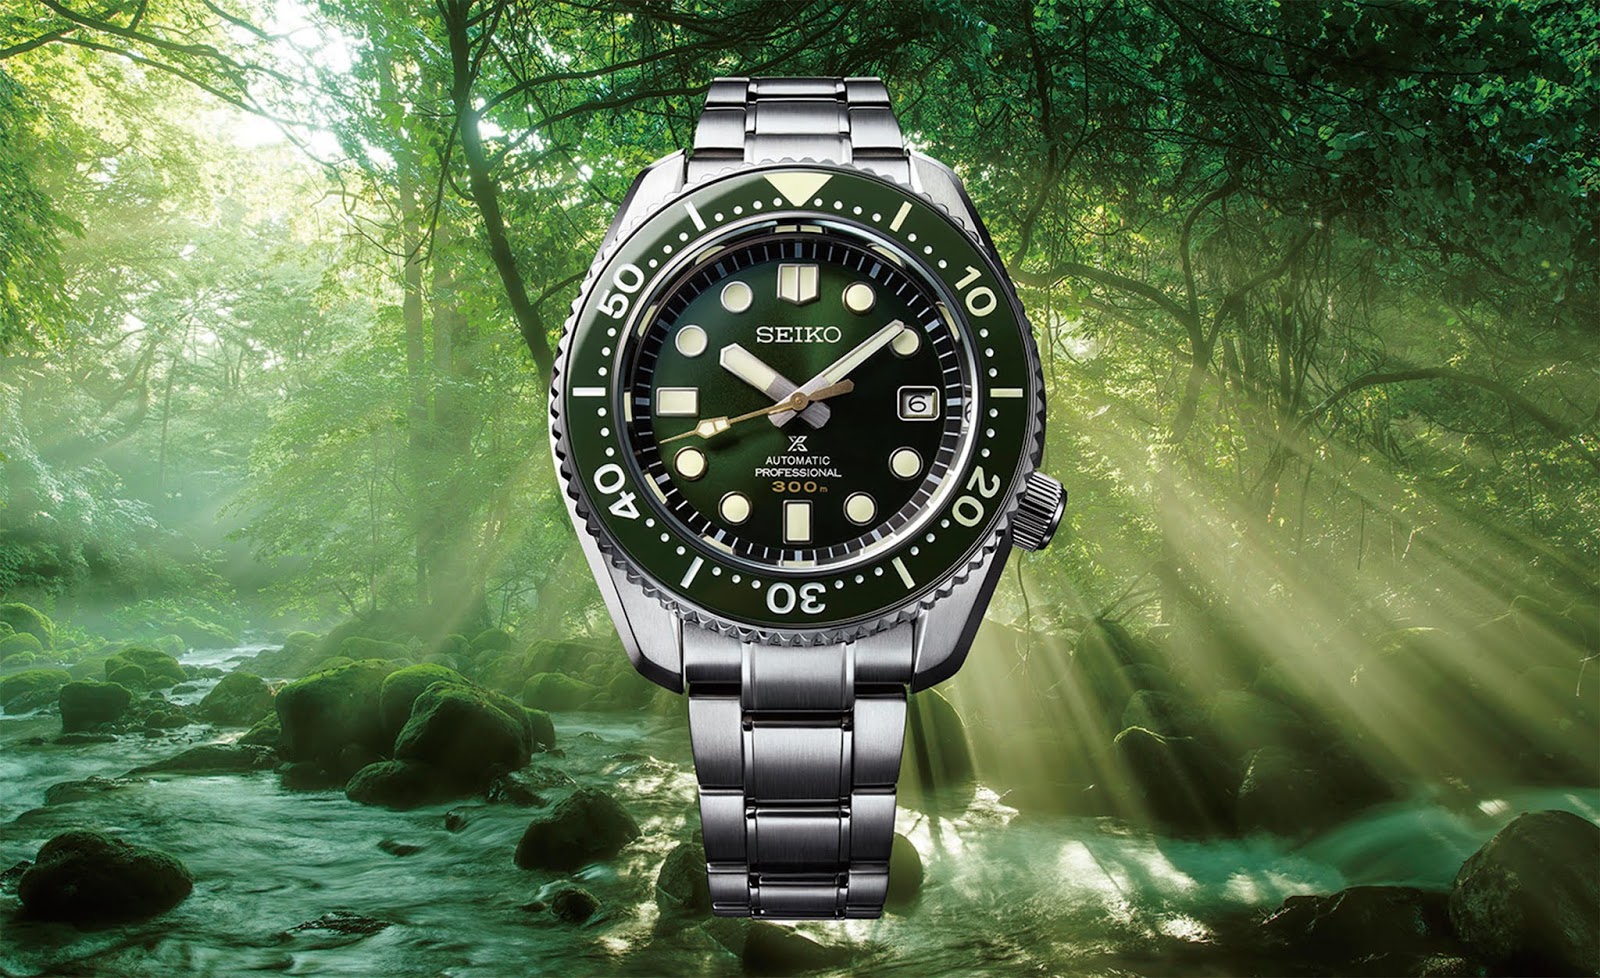 My Watch Collection: Seiko Prospex Diver 300m Marinemaster SLA019J1 Deep Forest Limited Edition (or - Desirable as a Collectable, A Review (plus Video)